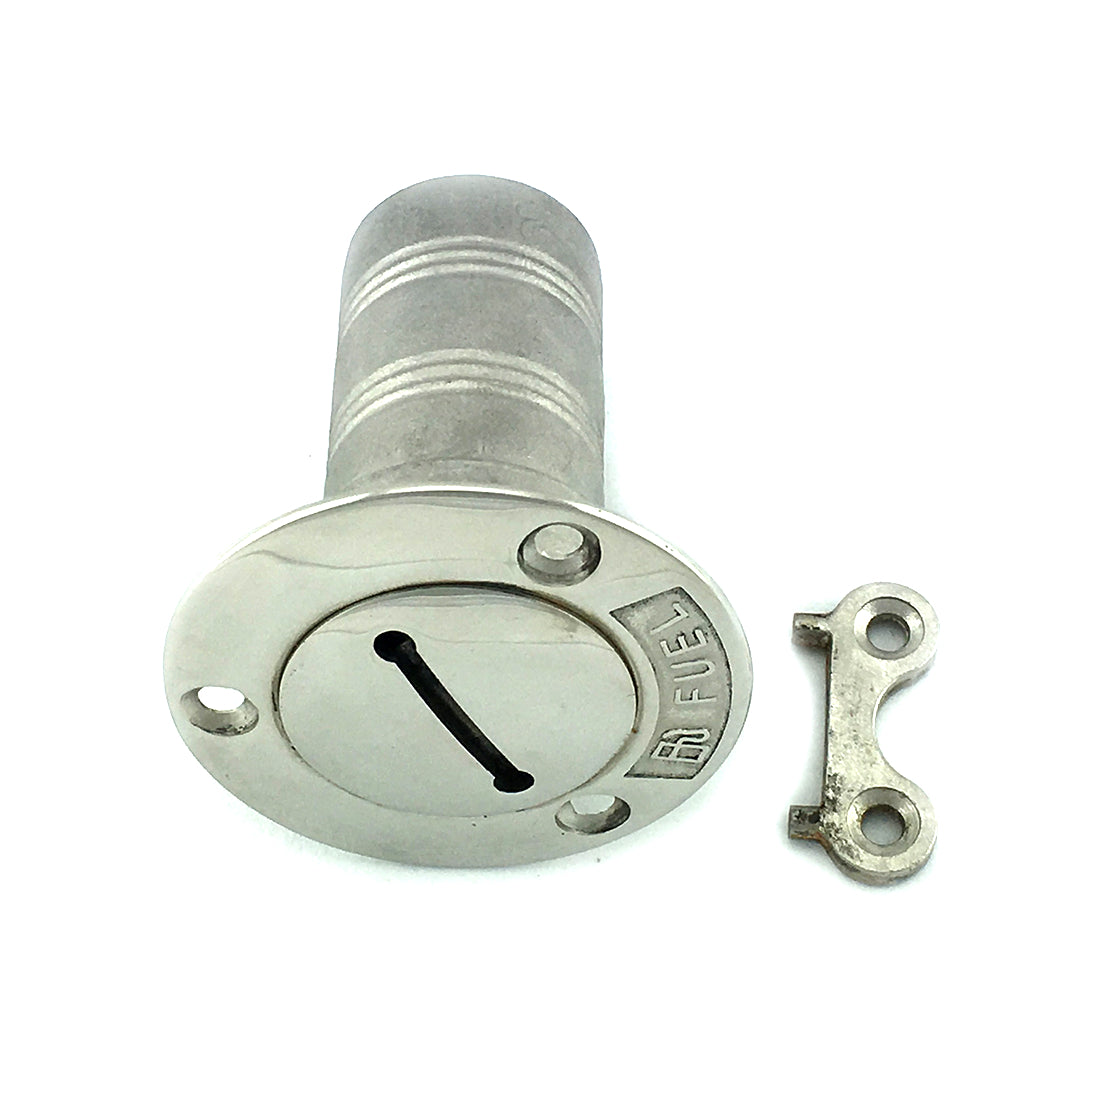 Stainless steel deck fuel nozzles in type 316 marine grade stainless steel. Australia wide shipping.